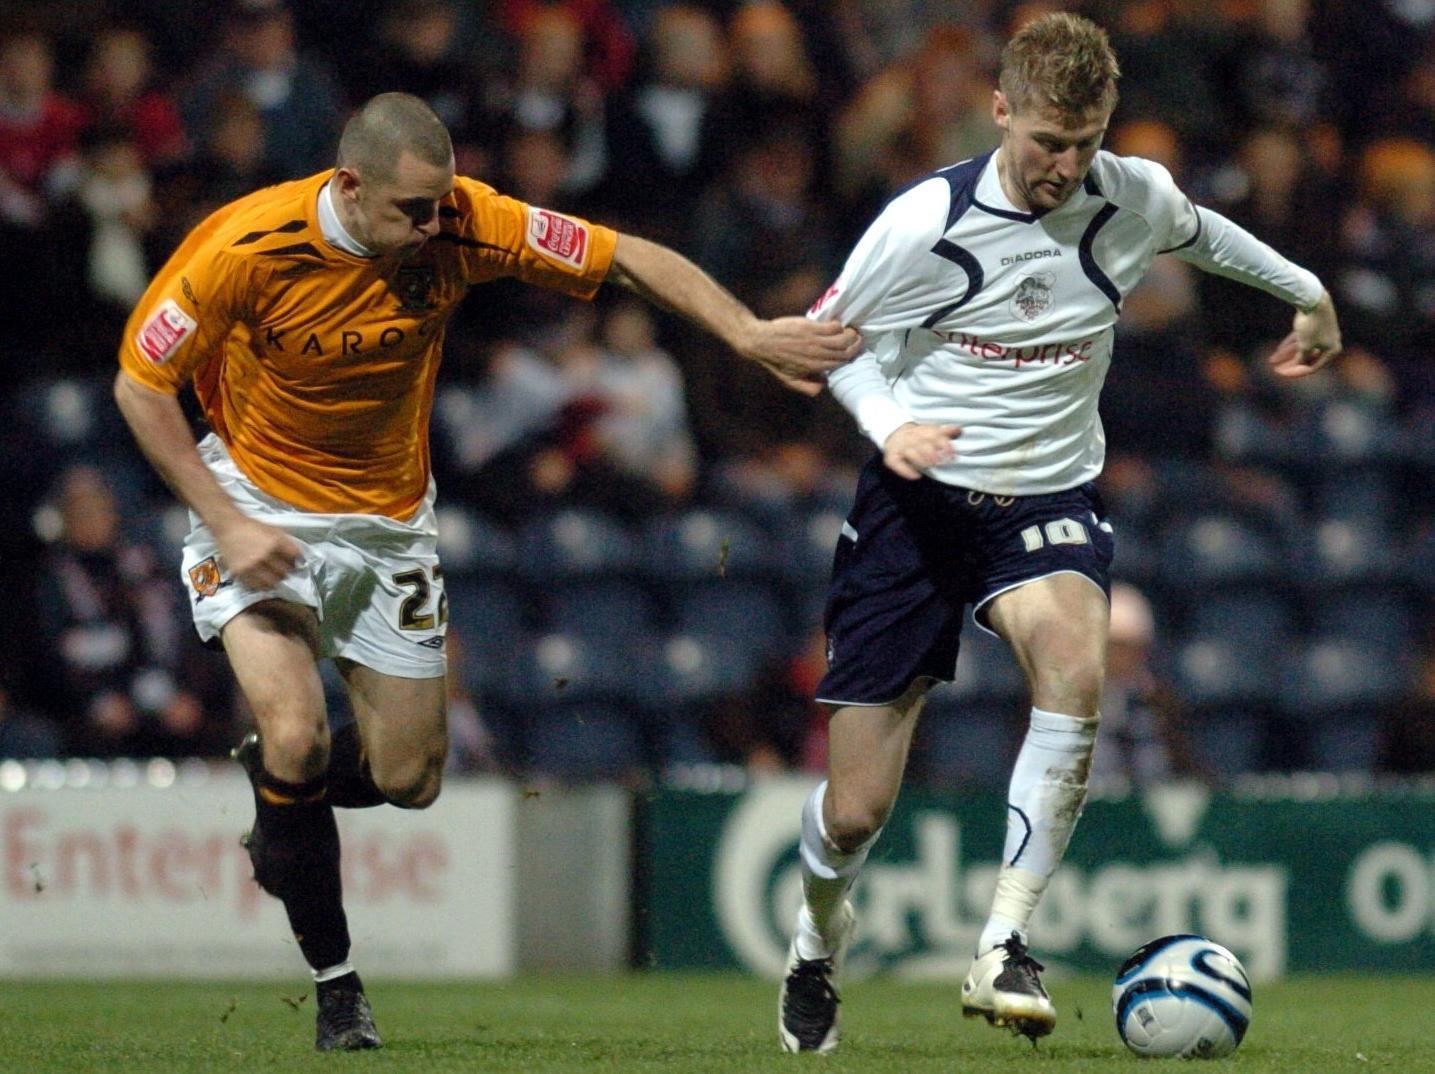 Paul Gallagher wearing no.10 in his first loan spell at Deepdale, playing a 3-0 win in 2007, Simon Whaley, Patrick Agyemang and Lewis Neal getting the goals.